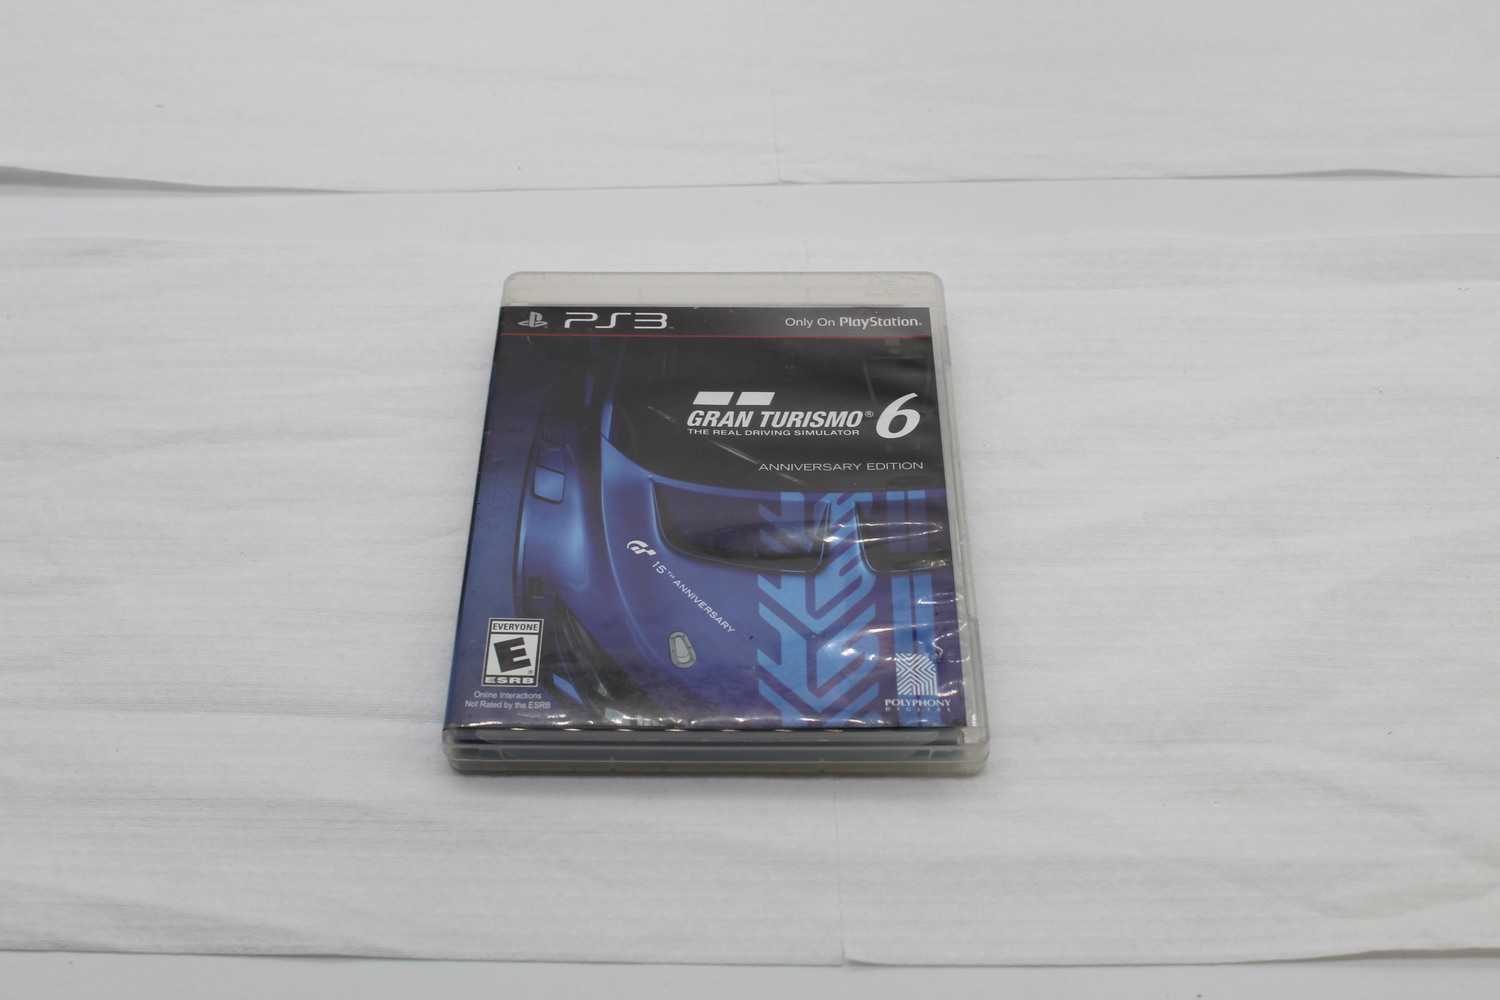 Gran Turismo The Real Driving Simulator 6 Playstation 3 Game and Cover Art